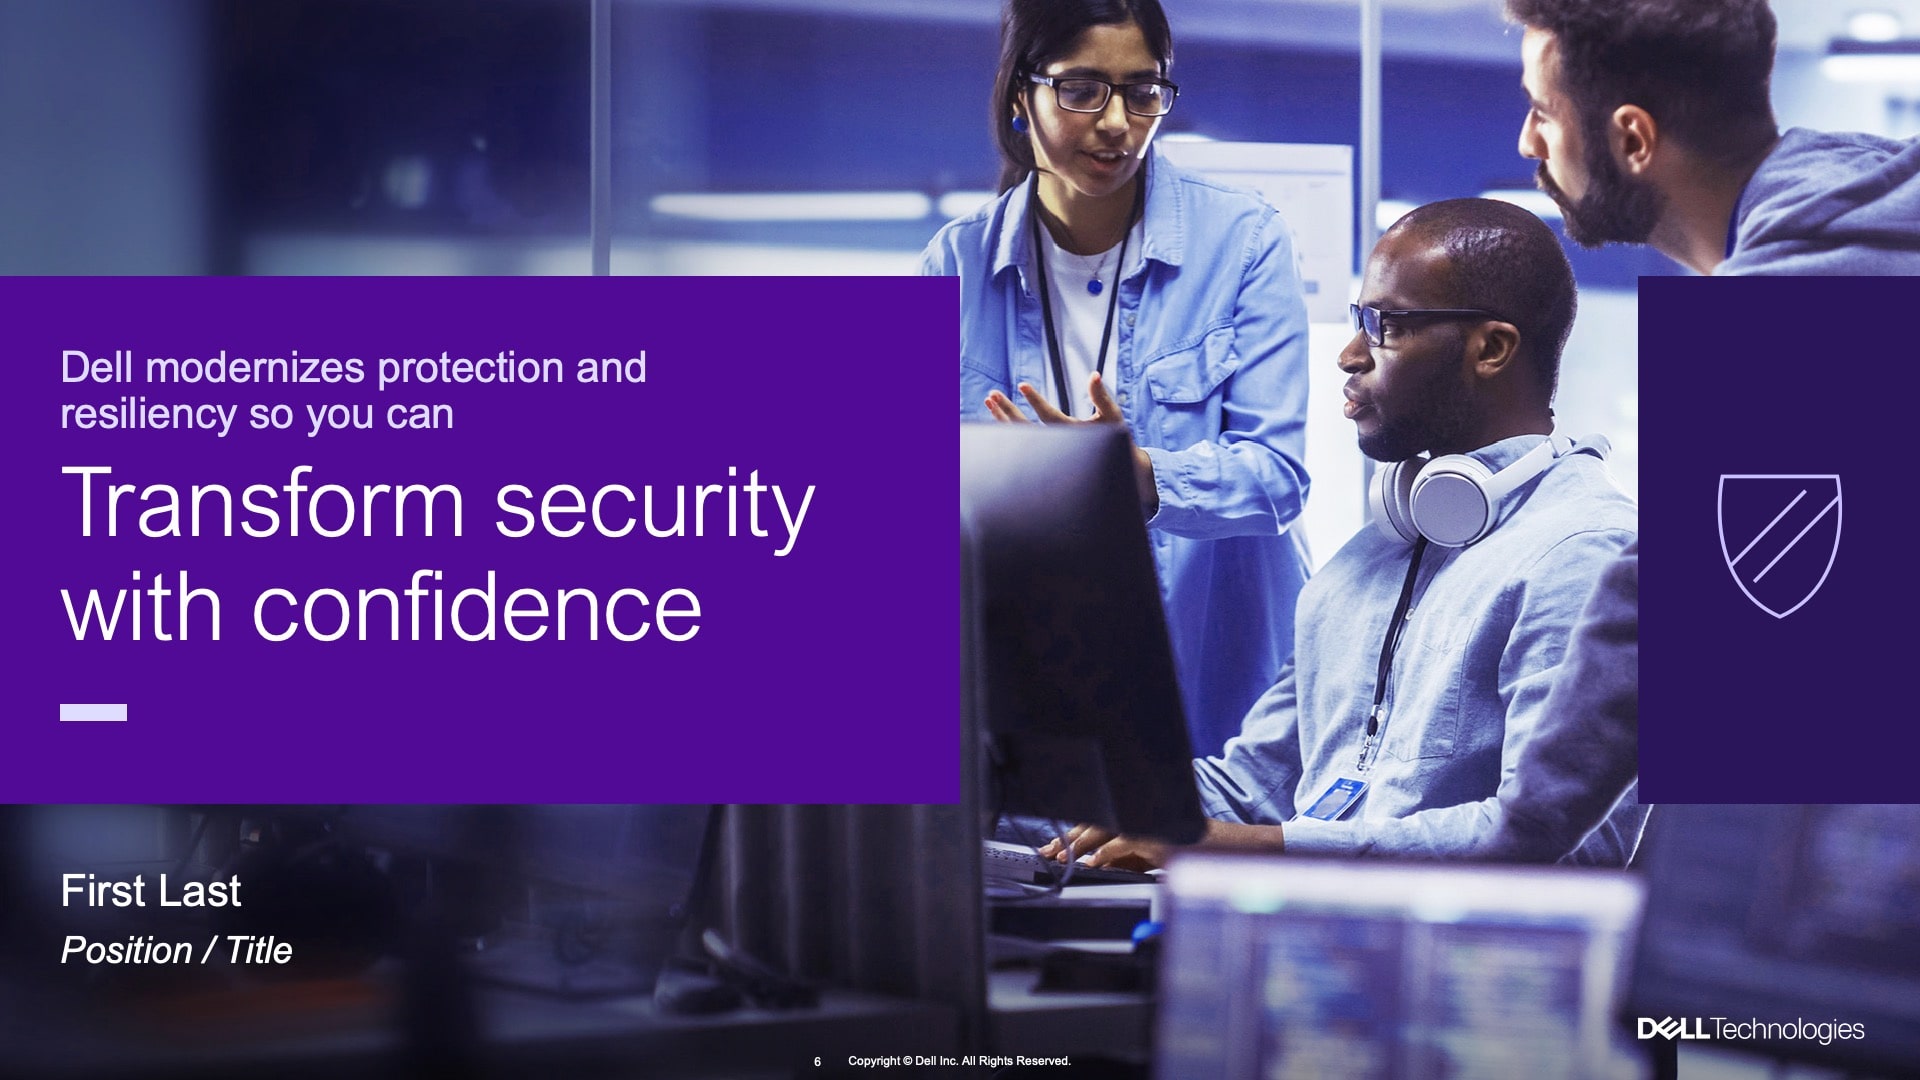 A slide from the Dell Technologies Advantage presentation. A group of people collaborate around a Dell monitor in an office. A purple band has text that says "Transform security with confidence".